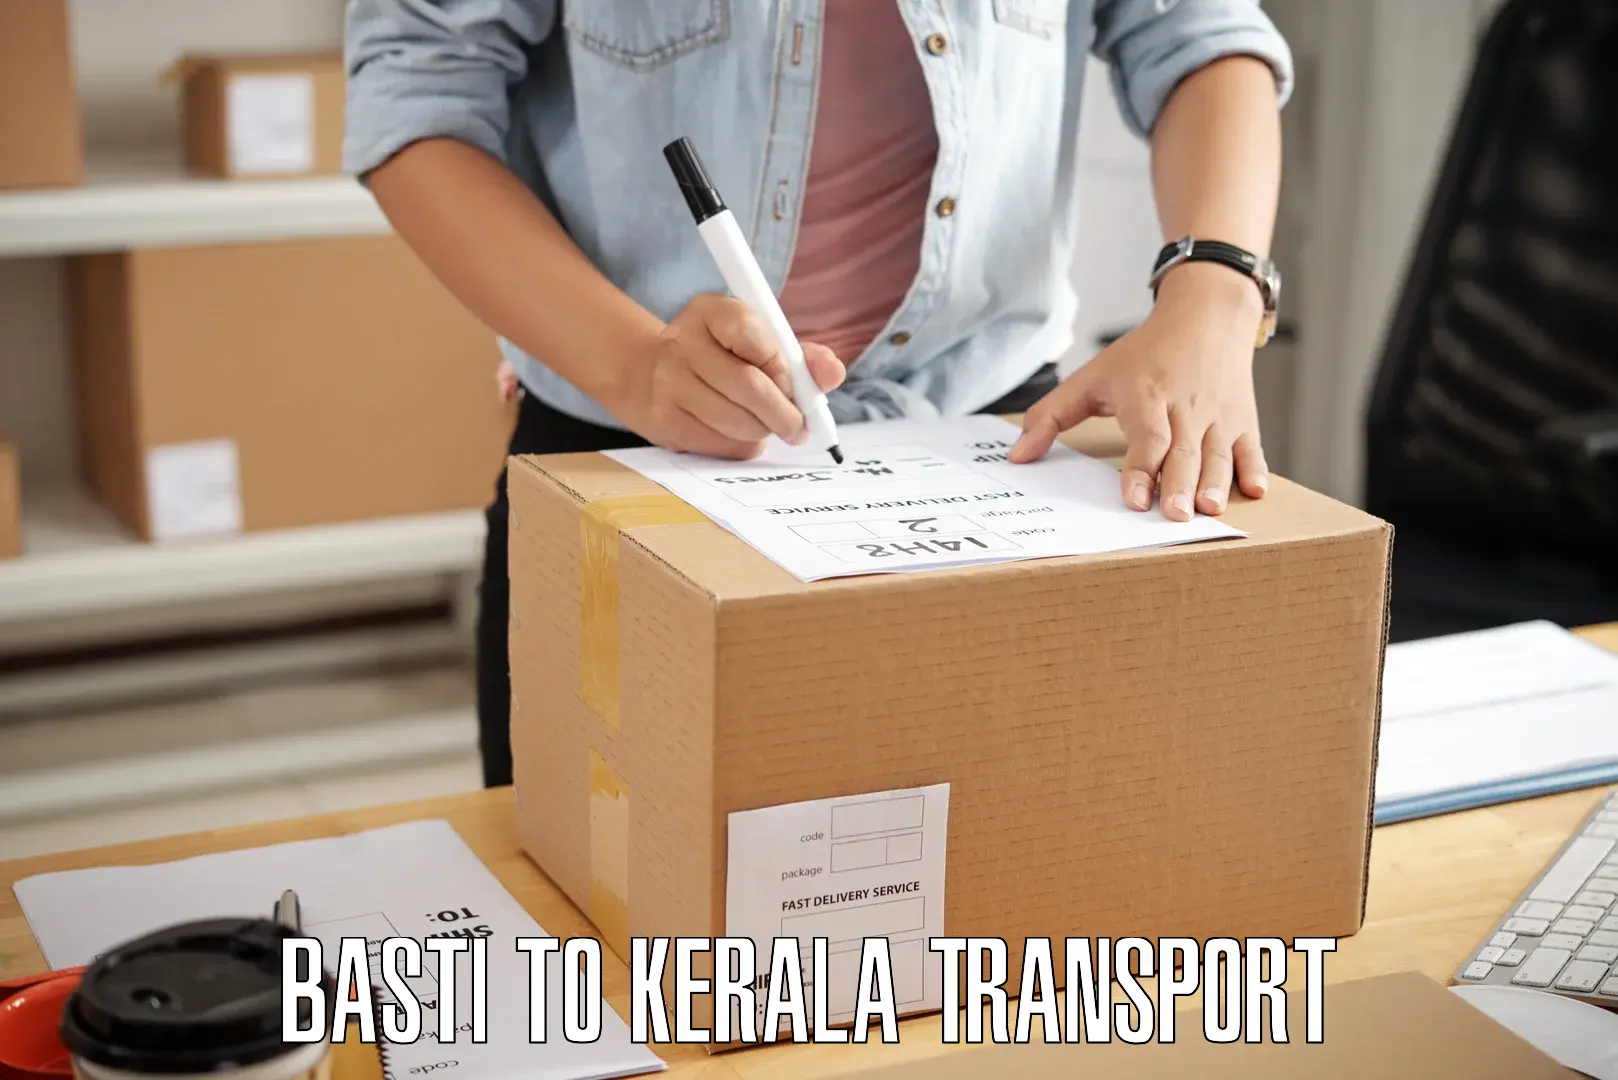 Delivery service Basti to Thrissur